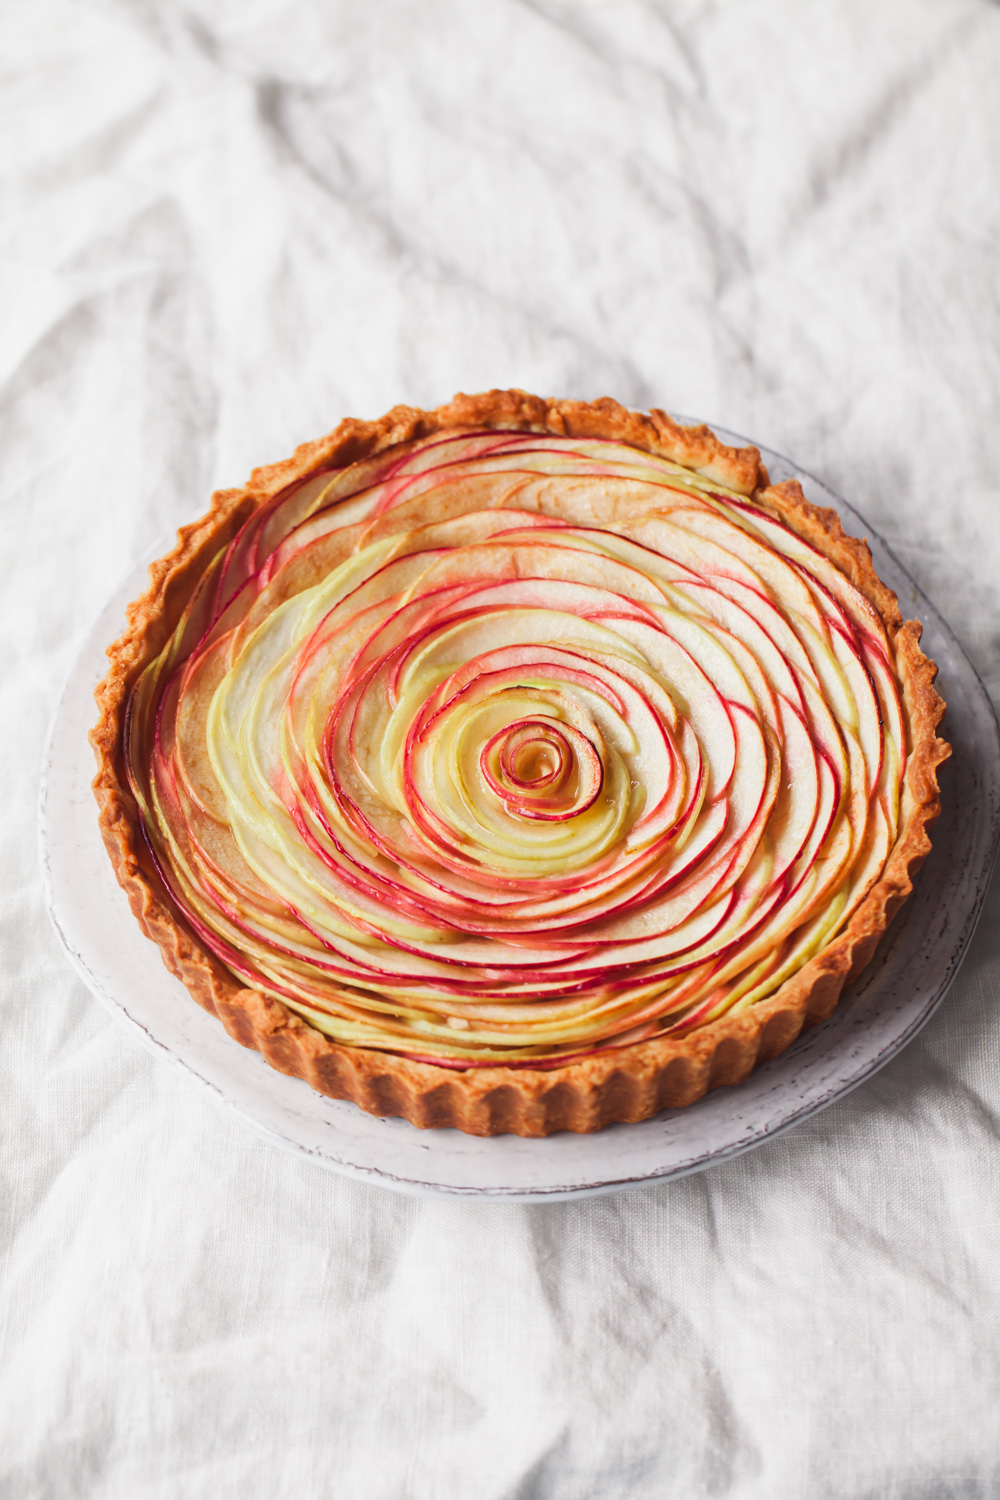 A baked apple rose tart with frangipane filling.  Apple slices are fanned around the tart to create a beautiful rose pattern.